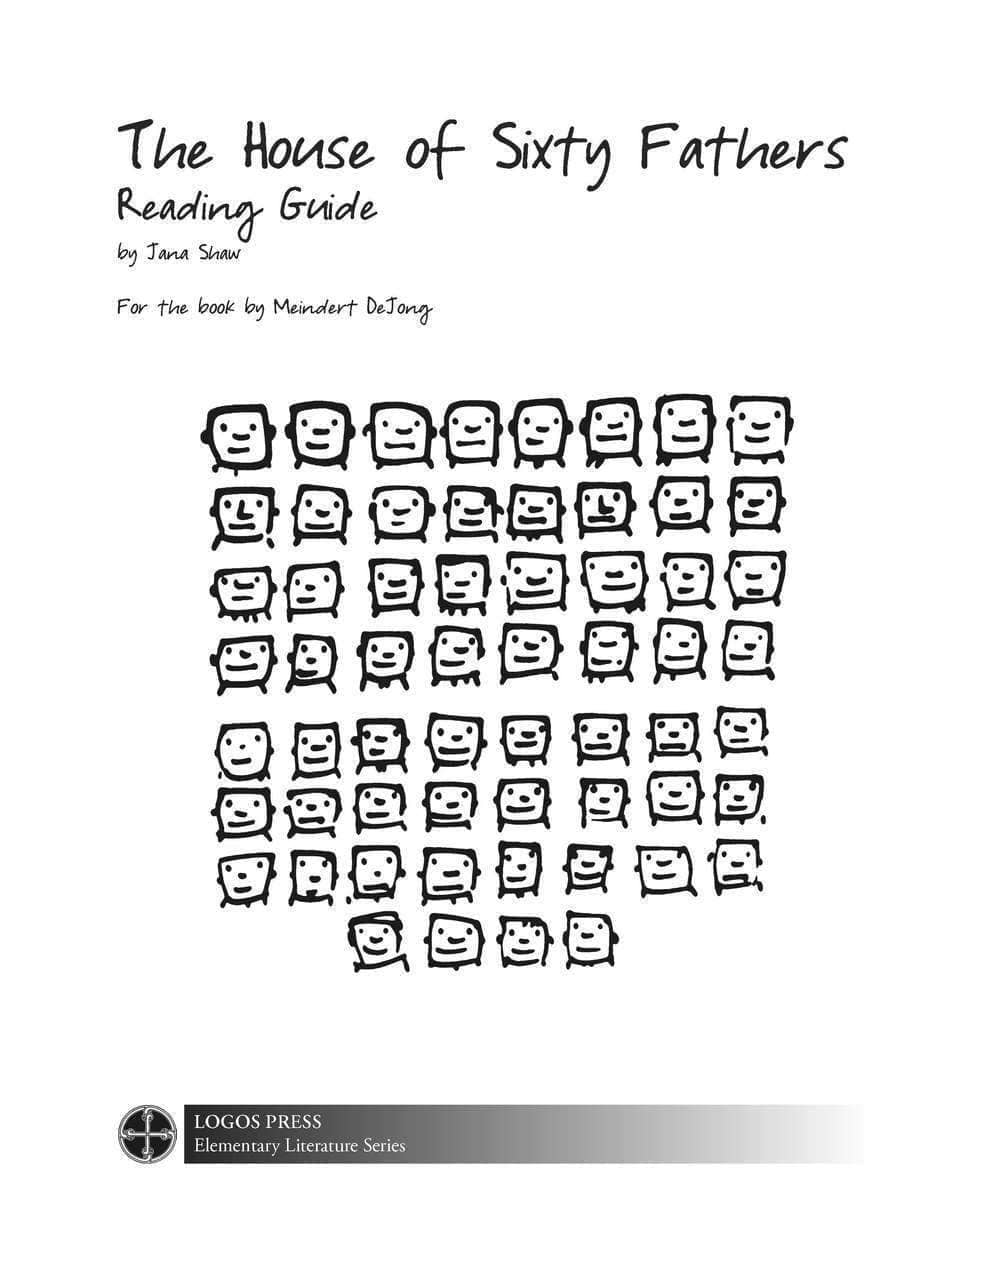 The House of Sixty Fathers - Reading Guide (Download)